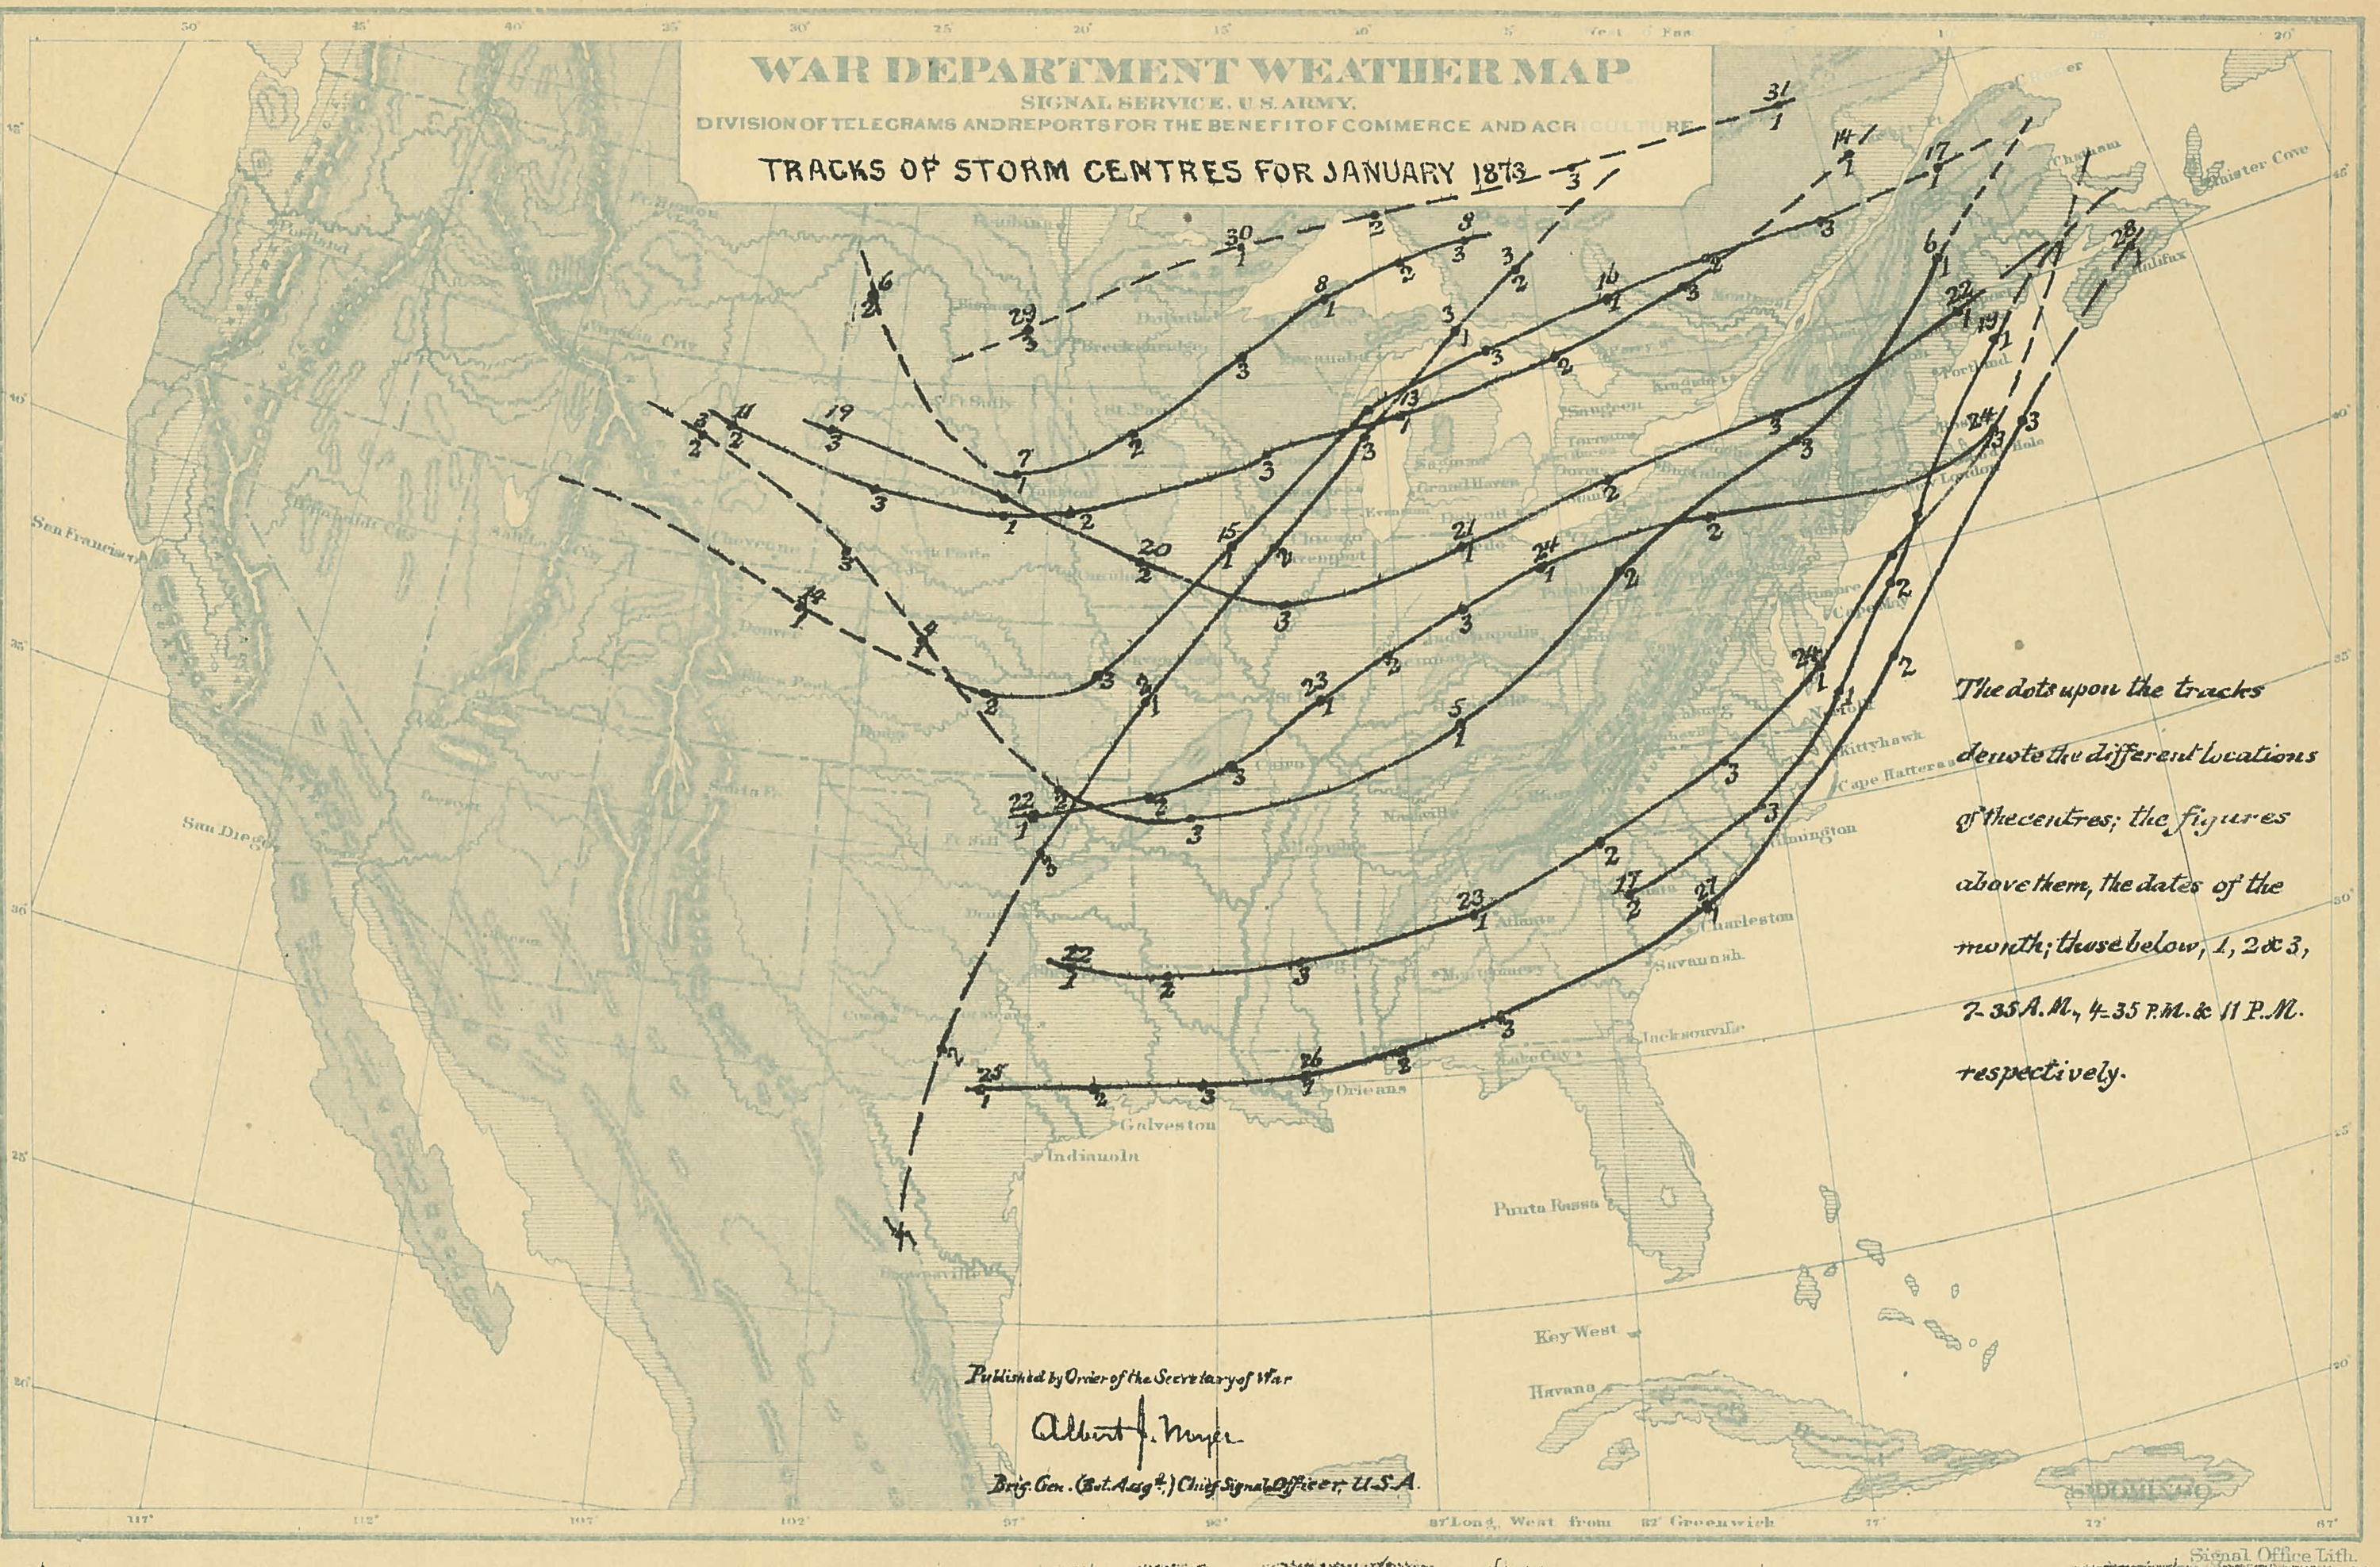 Weather Map from the first issue of Monthly Weather Review from January 1873. The sizes of the full page (including margins cropped for display here) is 11.5 in. × 9.25 in. for the chart. Scan courtesy of Deirdre Clarkin, NOAA Central and Regional Libraries.